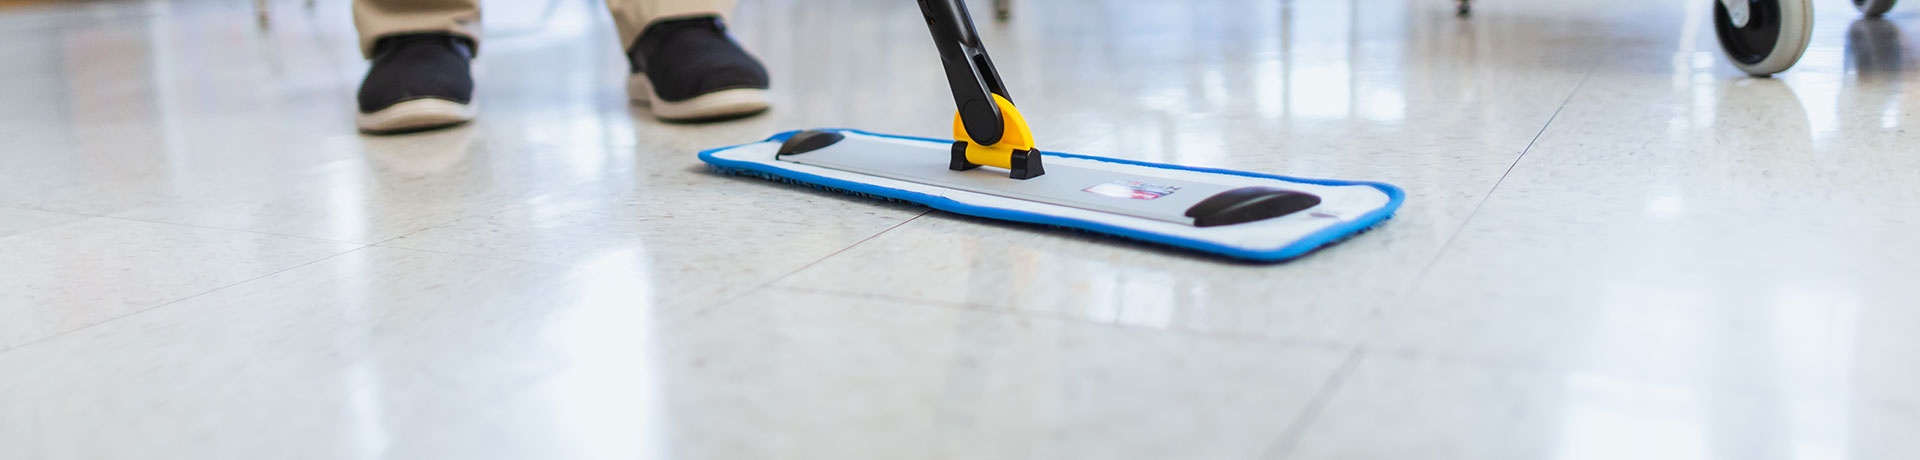 ServiceMaster Clean professional cleaning floor in a commercial space